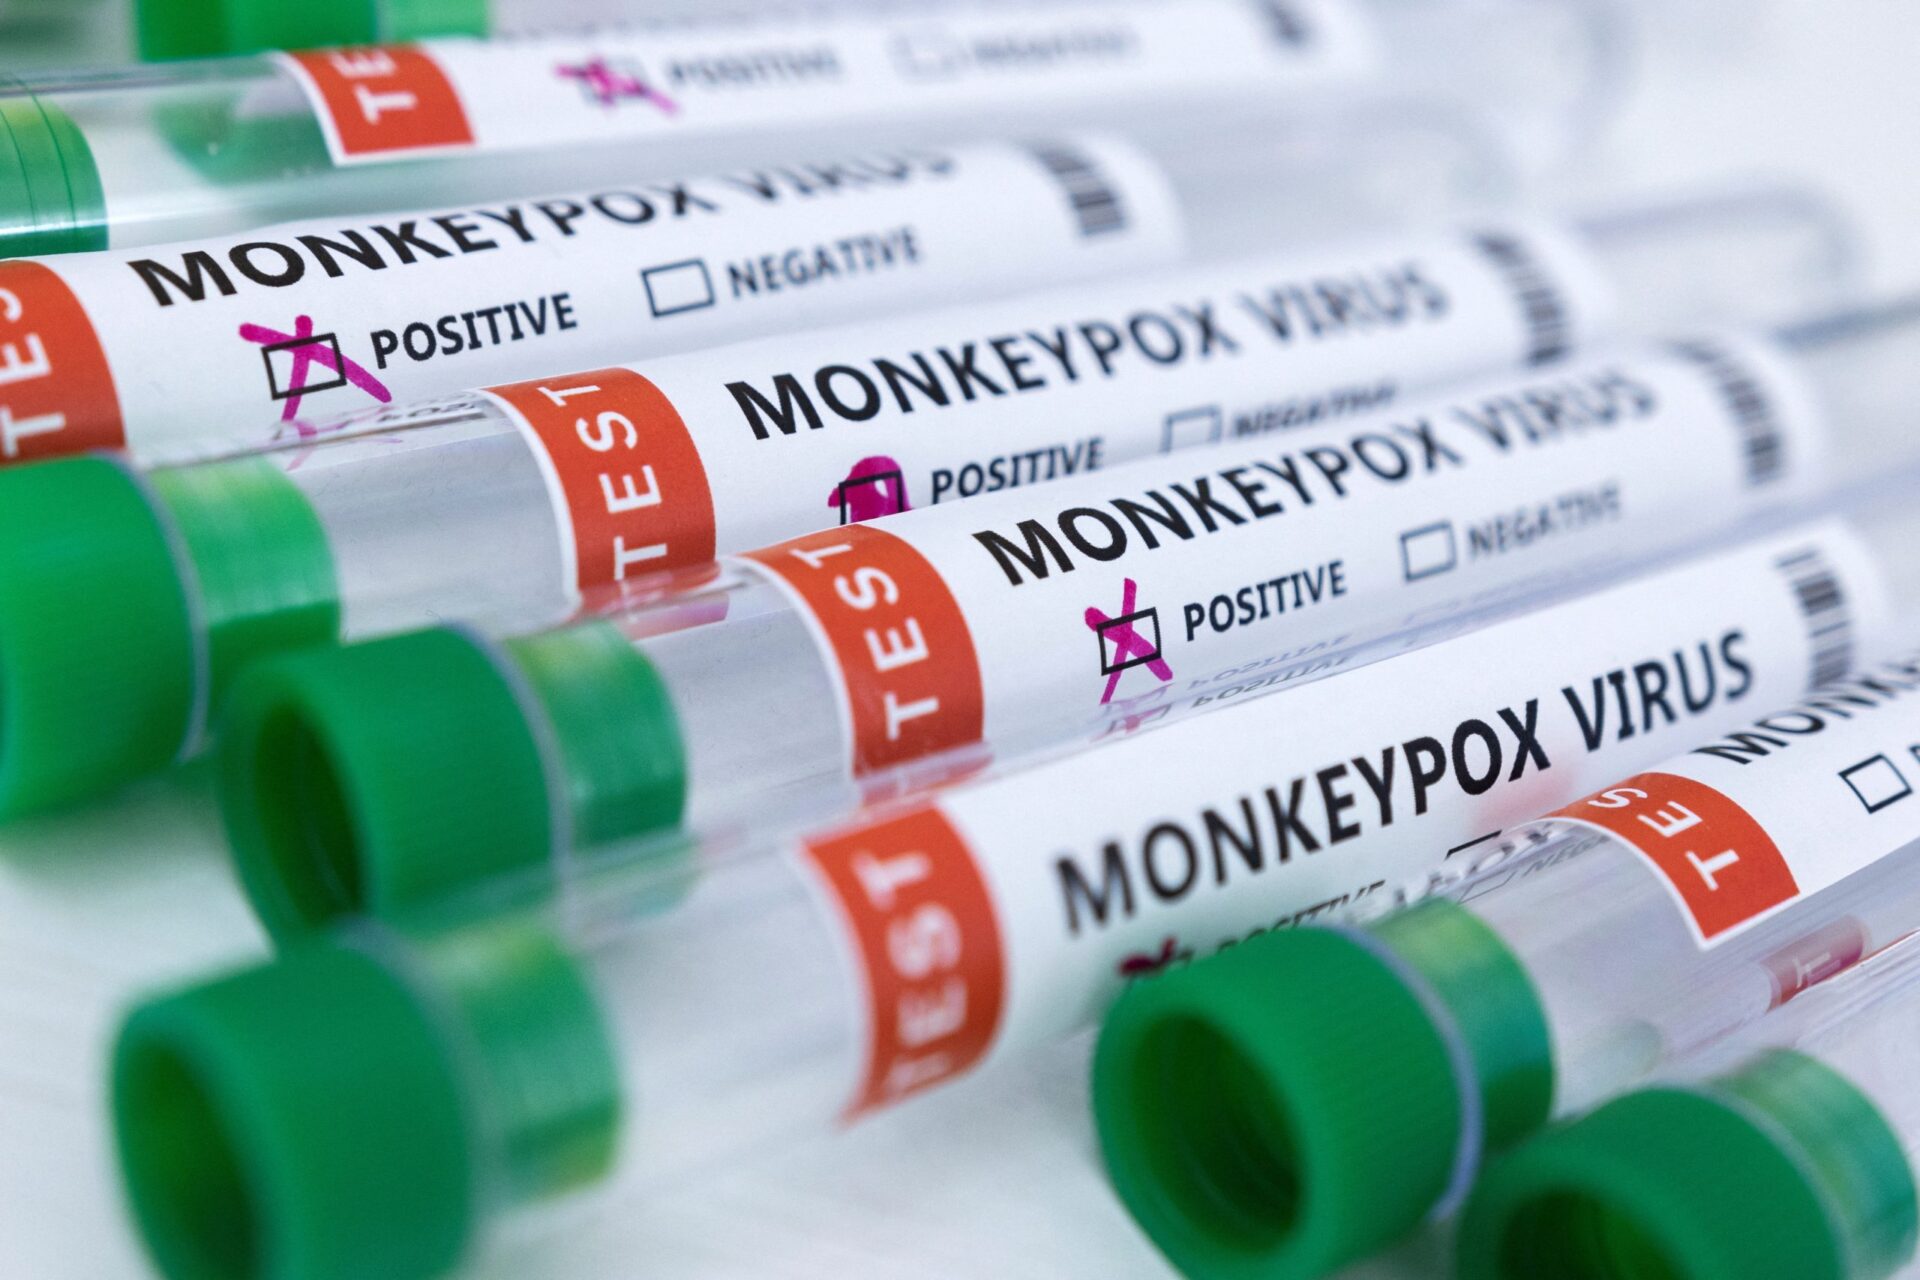 Big revelation about monkeypox! This thing also spreads the virus